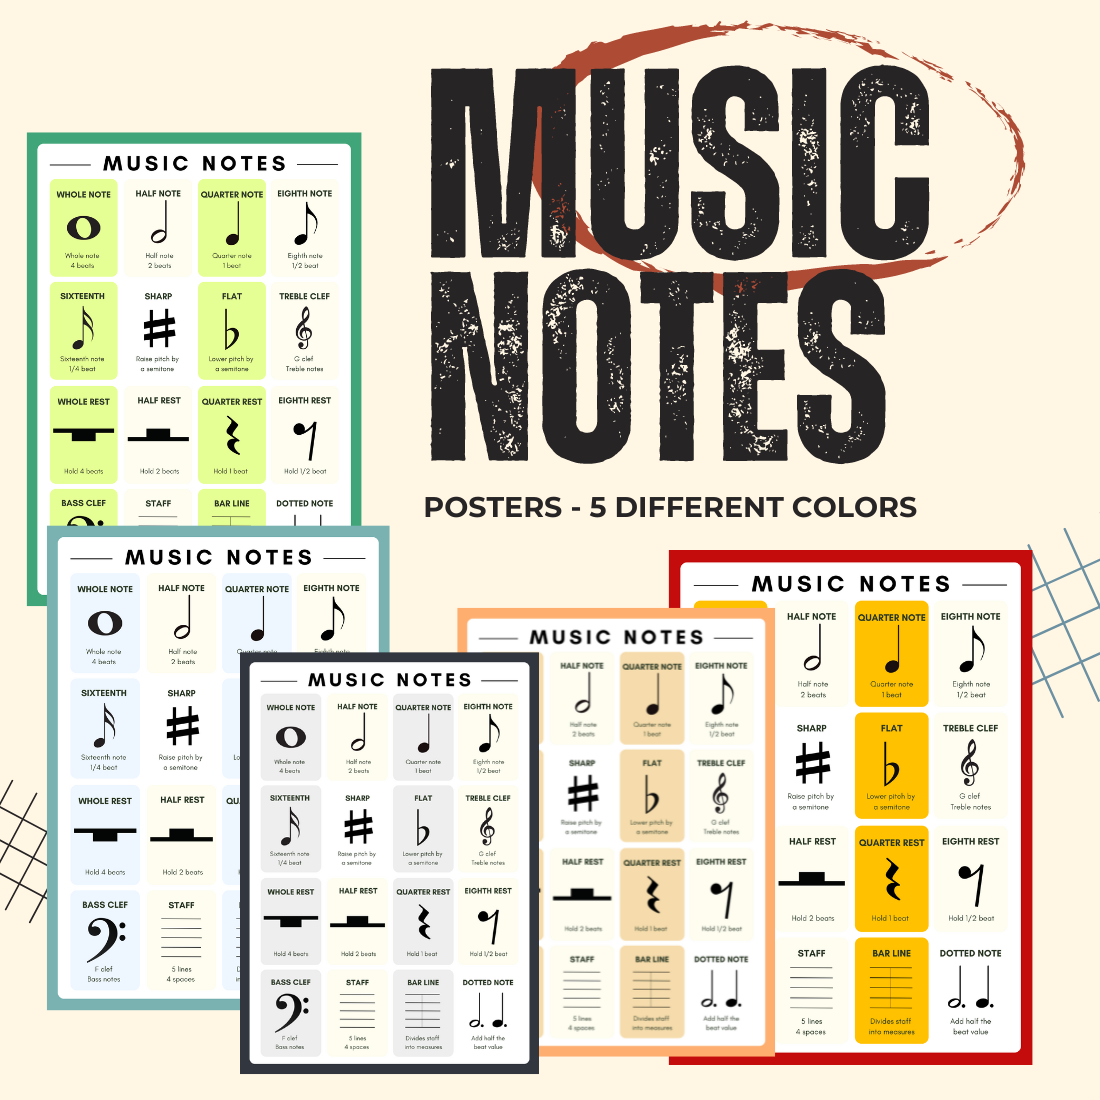 Music Poster - Wall Art, Classroom Posters, Homeschool Printables, Educational Poster cover image.